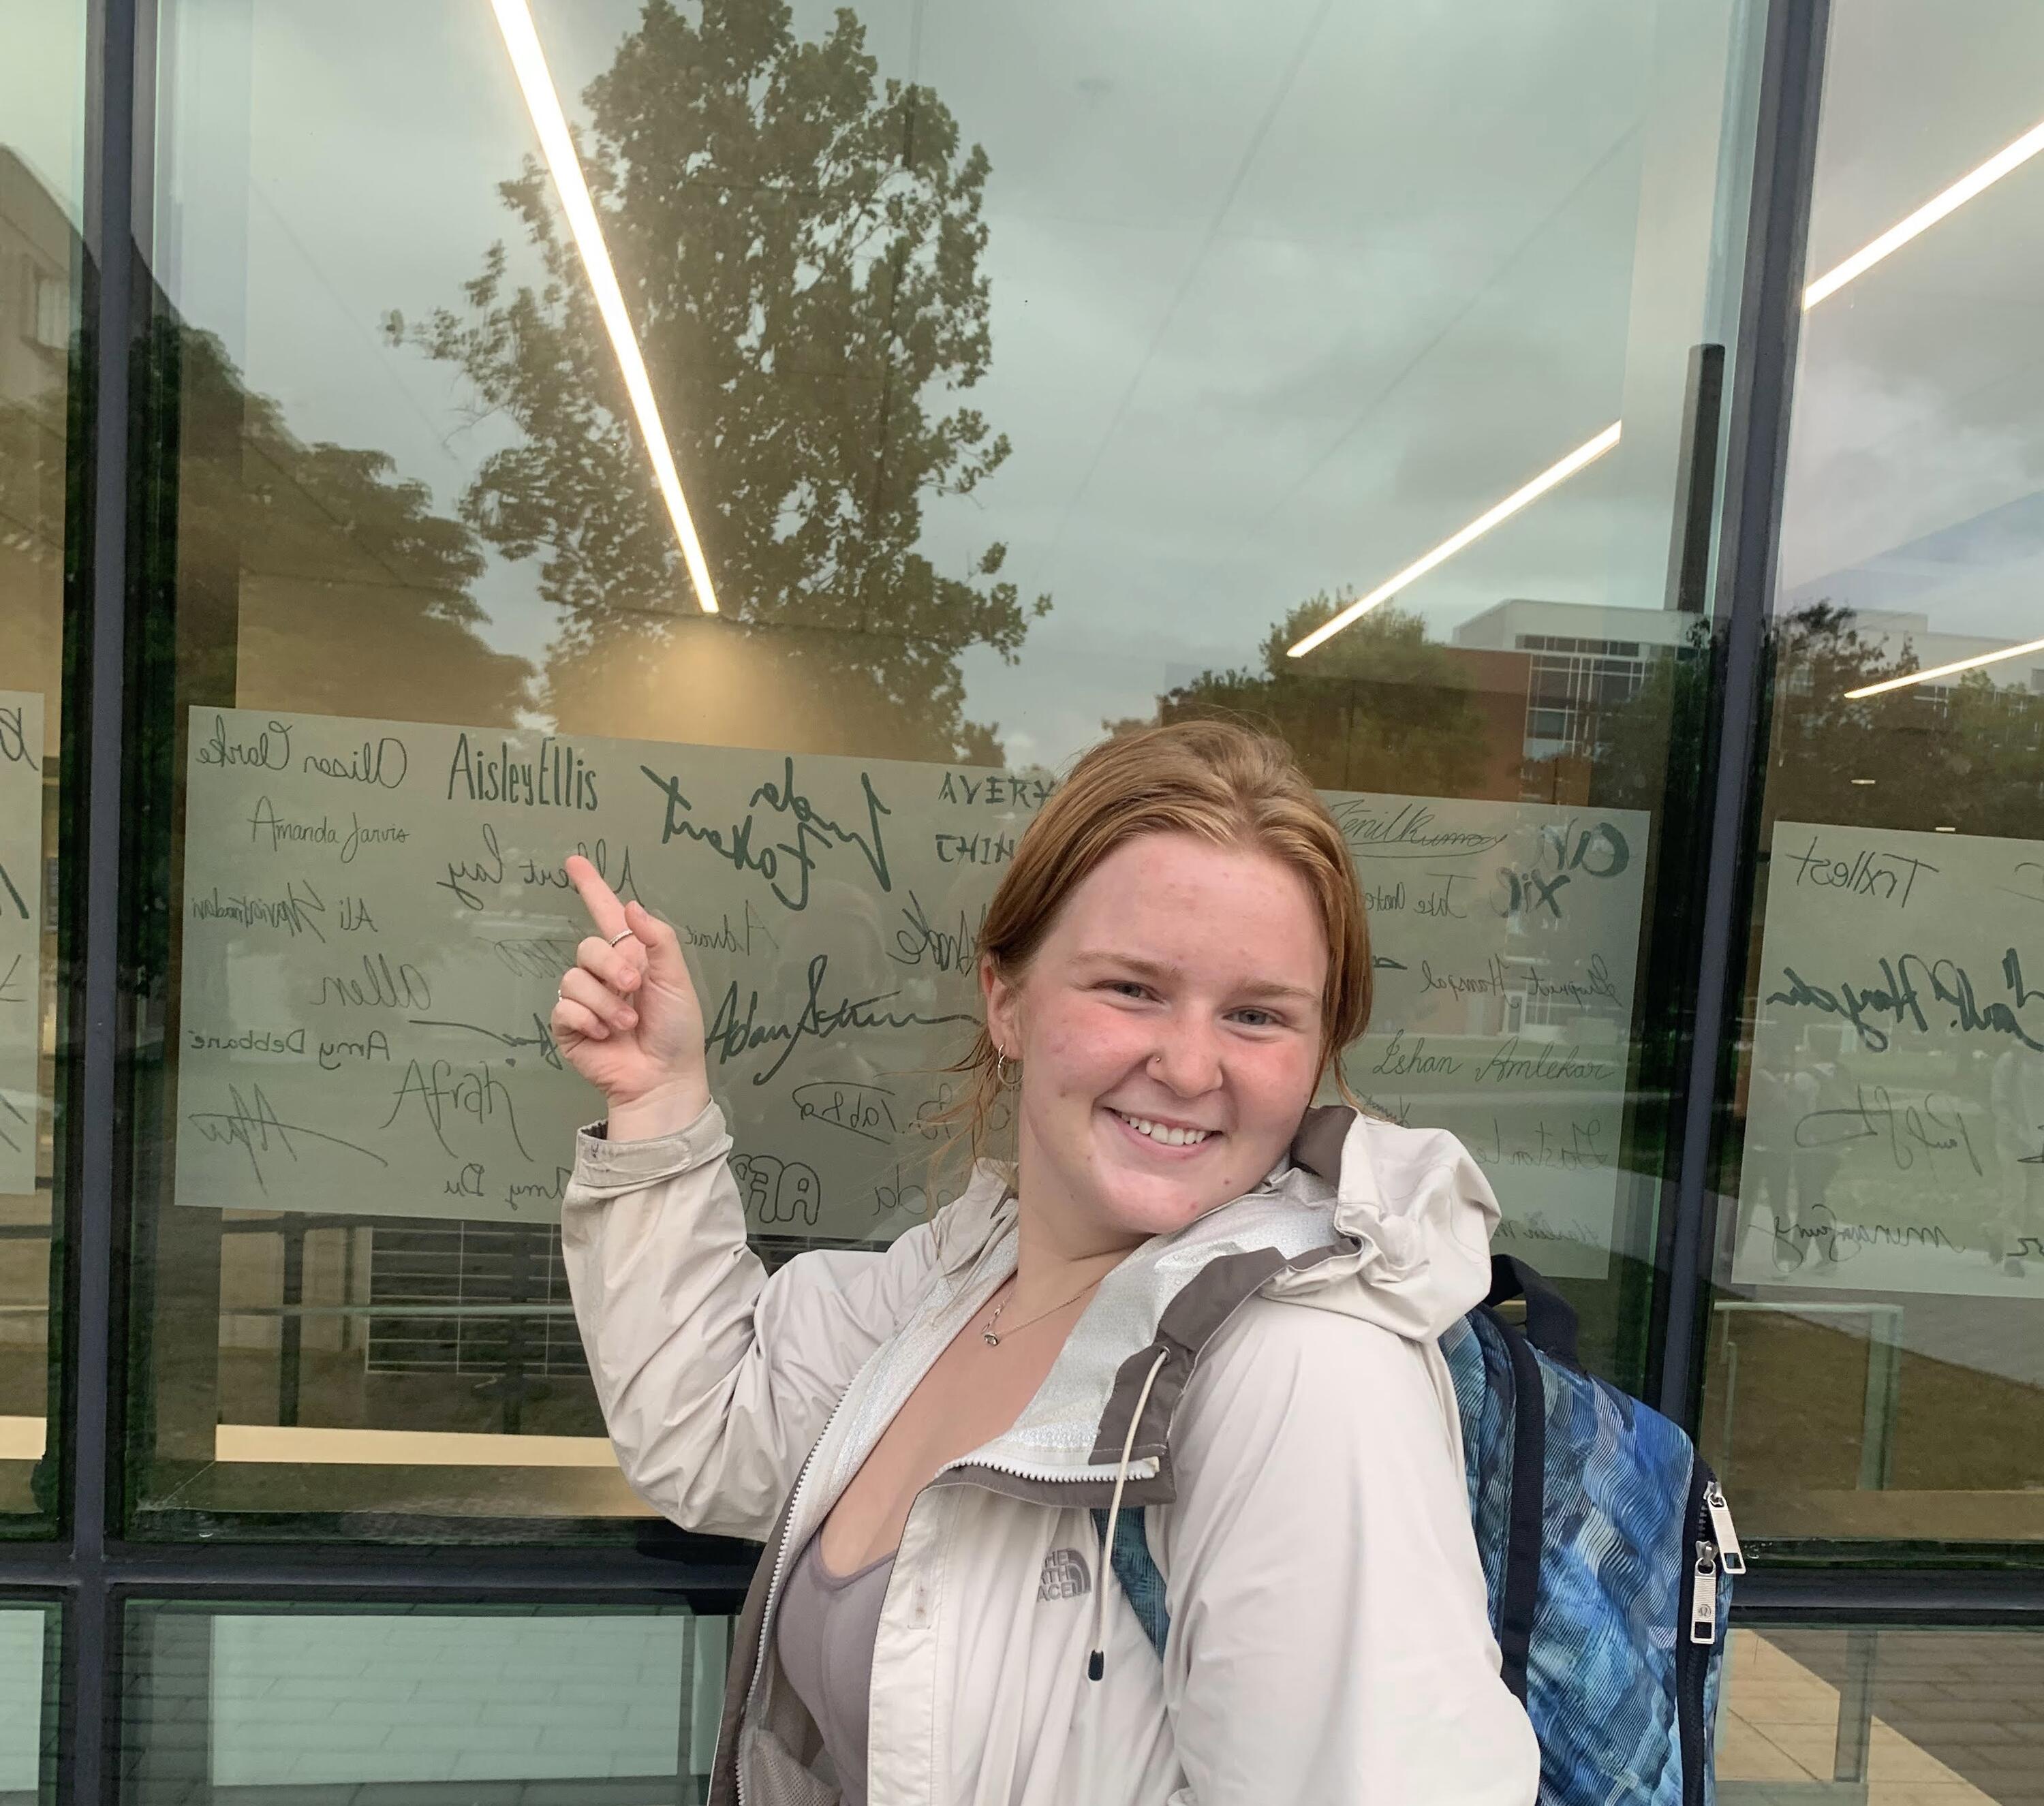 Aisley Ellis pointing to her written name on the window of Student Life Centre.